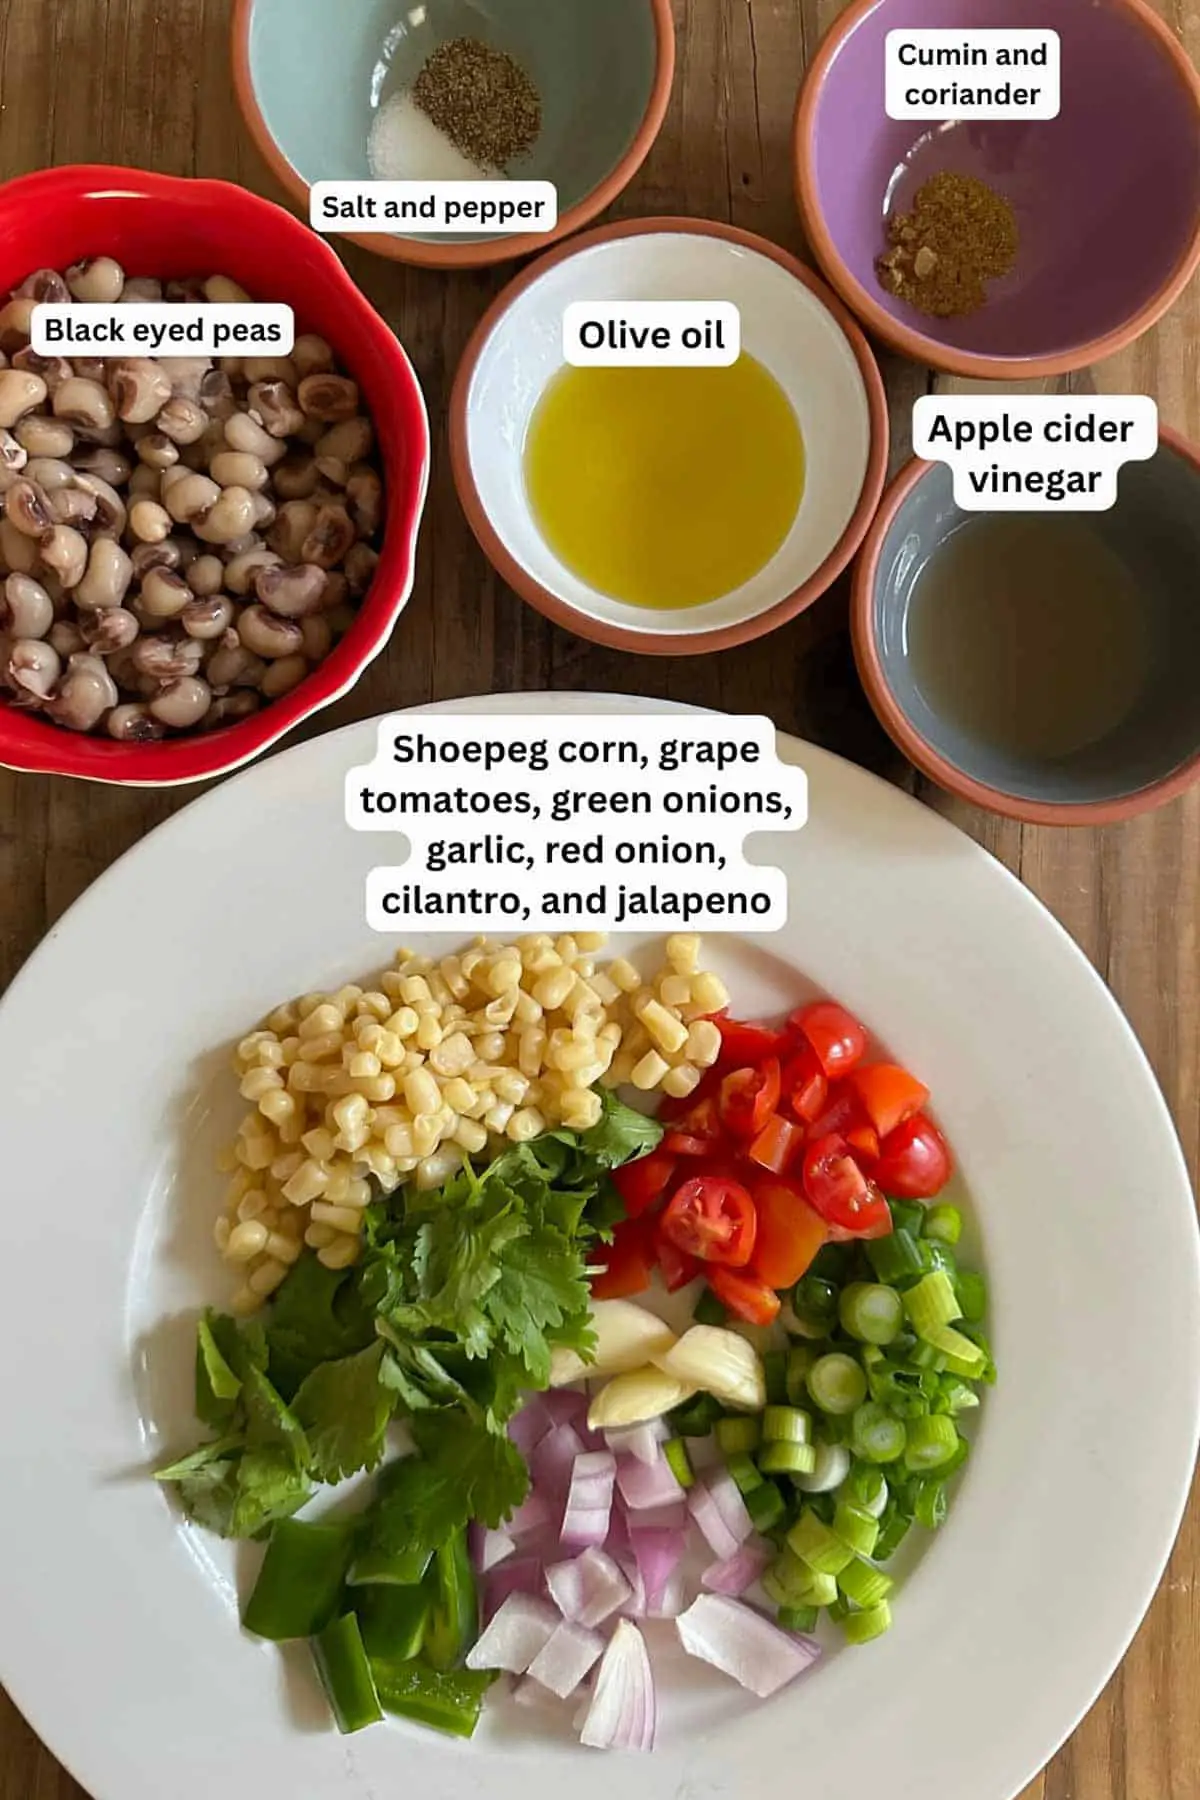 Ingredients of Texas caviar including black eyed peas, salt and pepper, cumin and coriander, olive oil, apple cider vinegar, shoepeg corn, grape tomatoes, green onions, garlic, red onion, cilantro, and jalapeno.